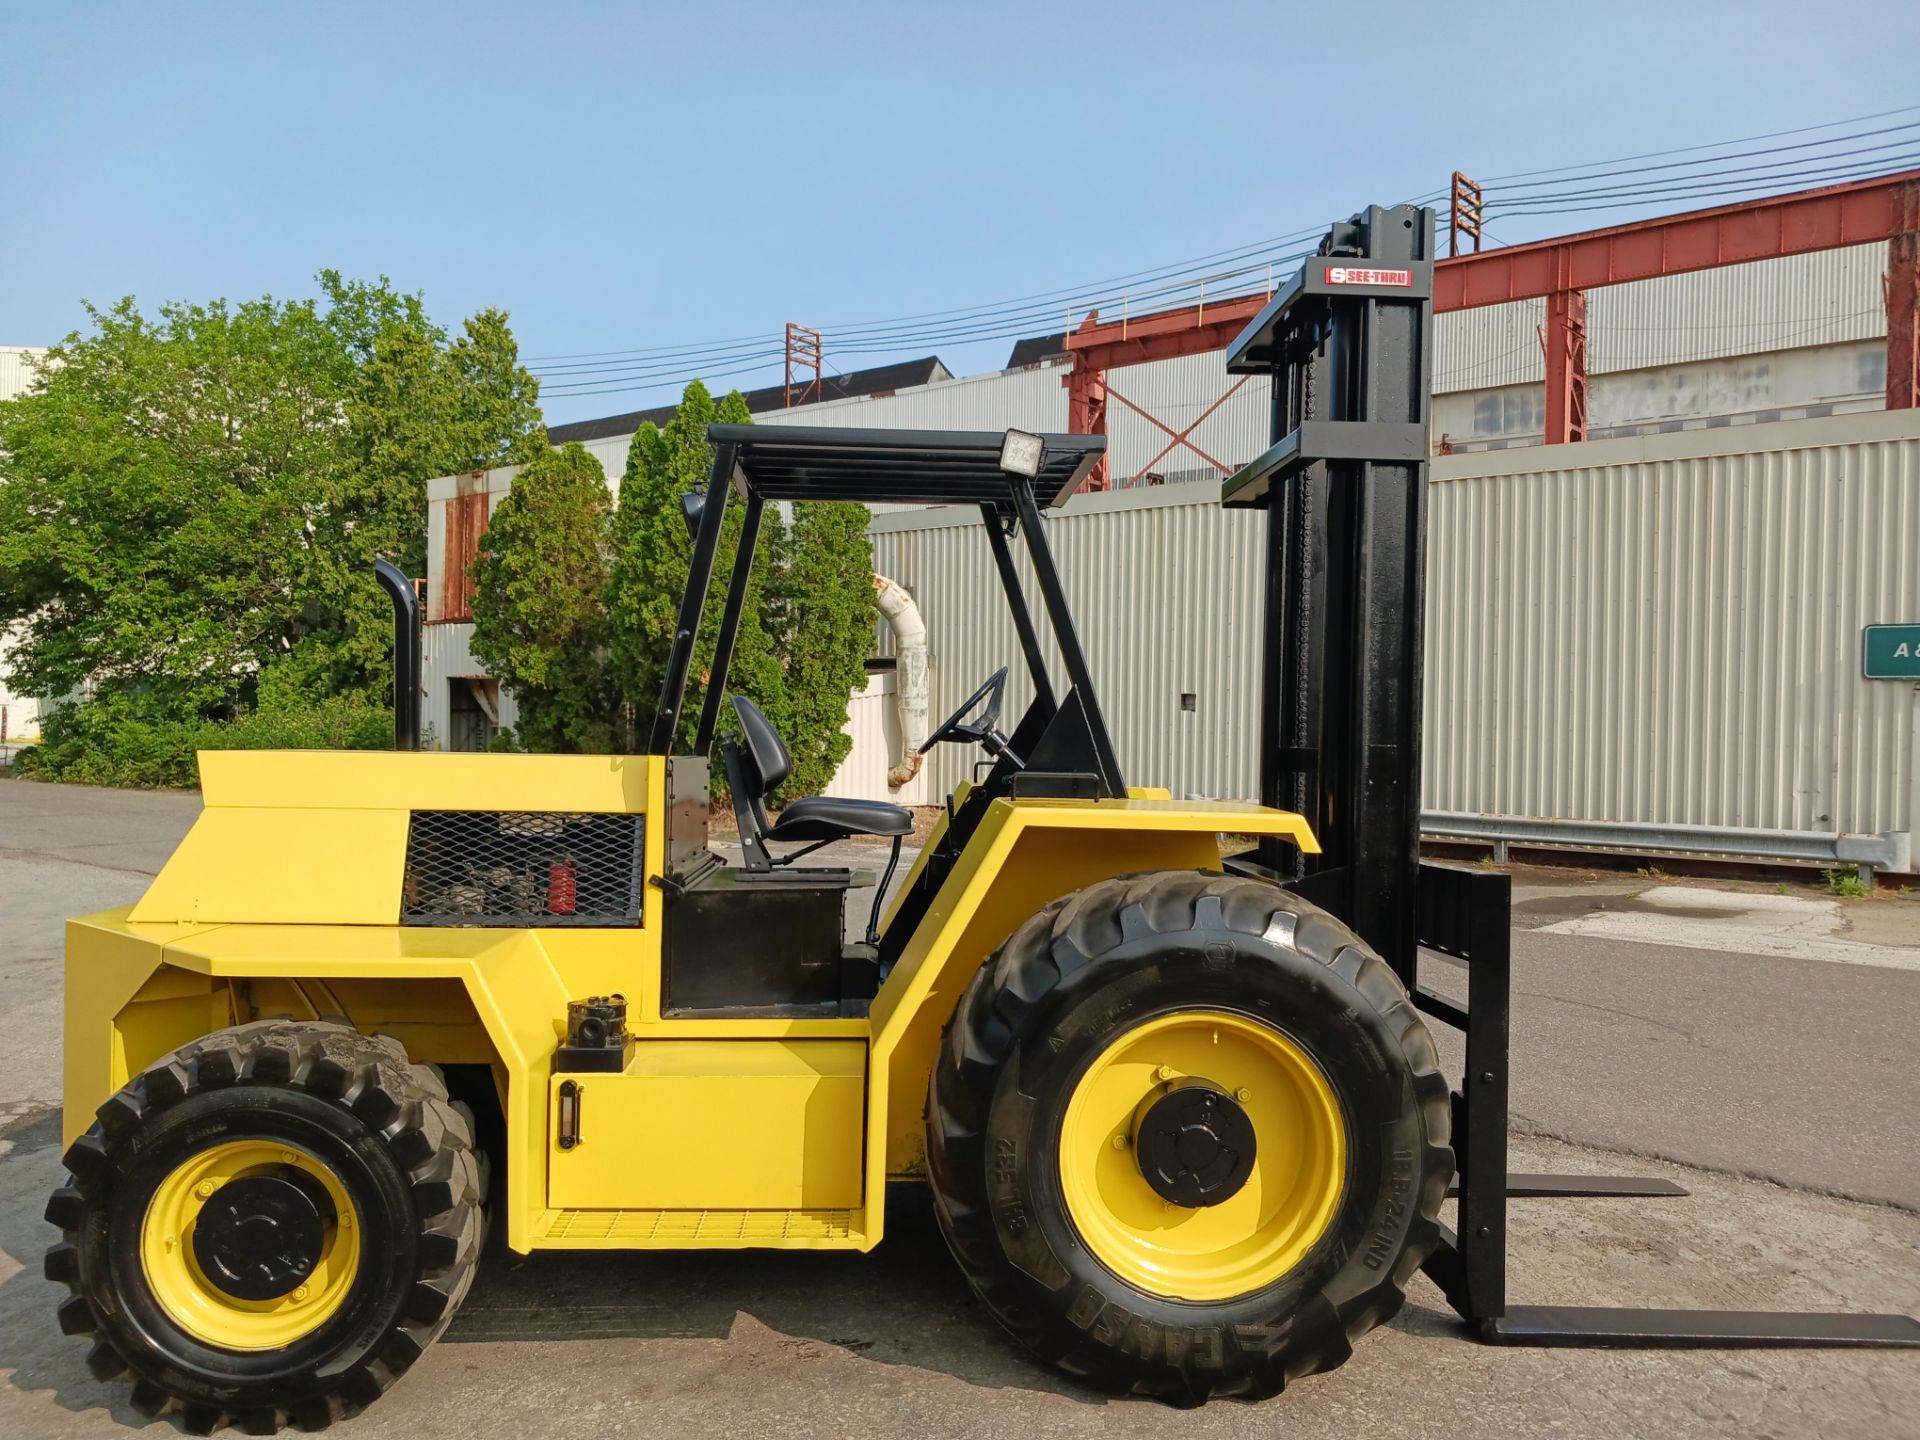 Sellick SD-80 8,000 lb Forklift - Lester, PA - Image 4 of 14